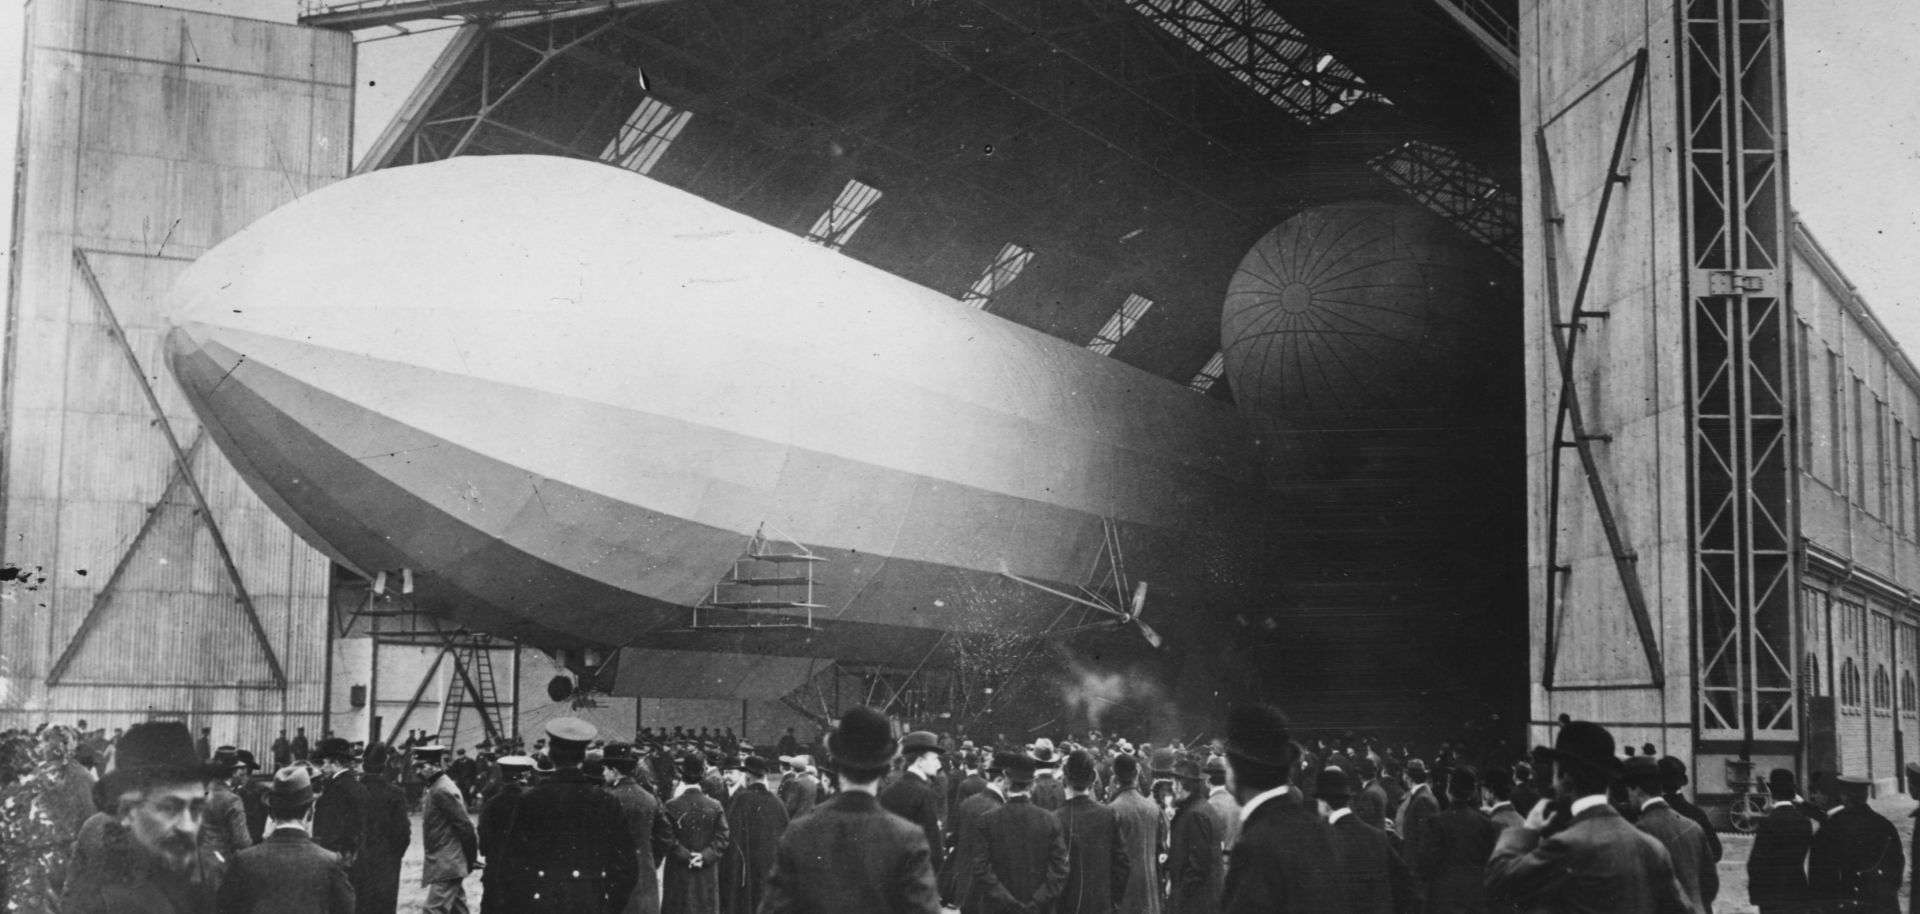 An early production Zeppelin emerges from an airship shed in Dusseldorf, Germany, circa 1914.